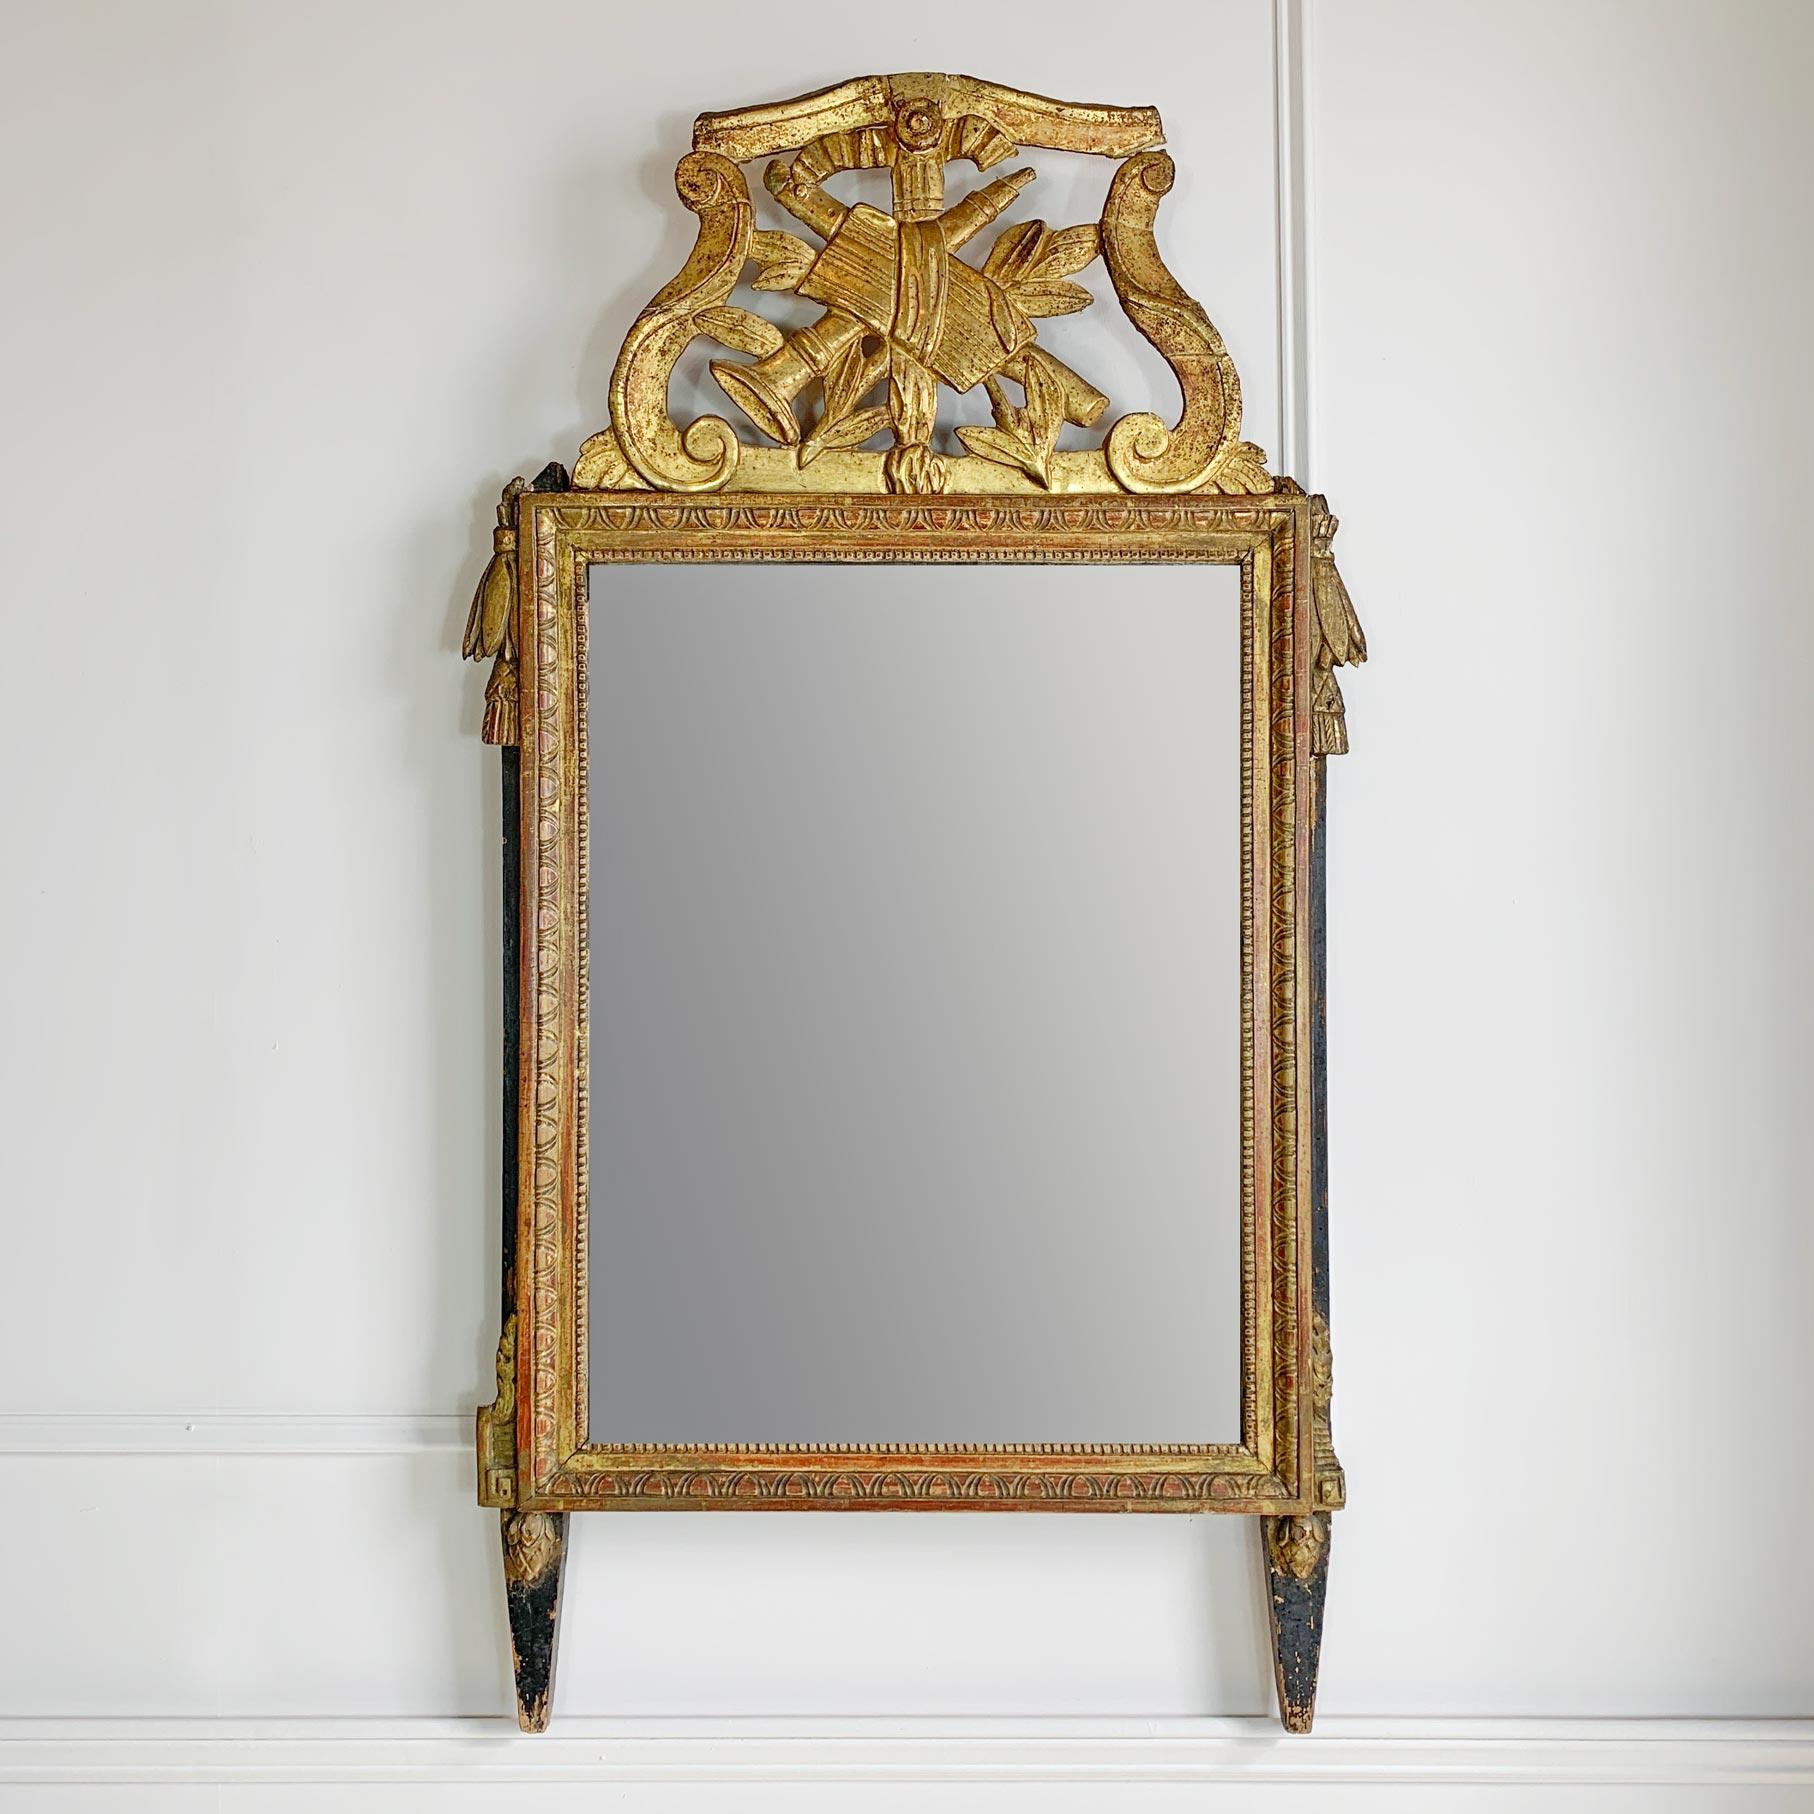 Superb Large 18th Century Louis XVI Gold Gilt Wood Mirror In Good Condition For Sale In Hastings, GB